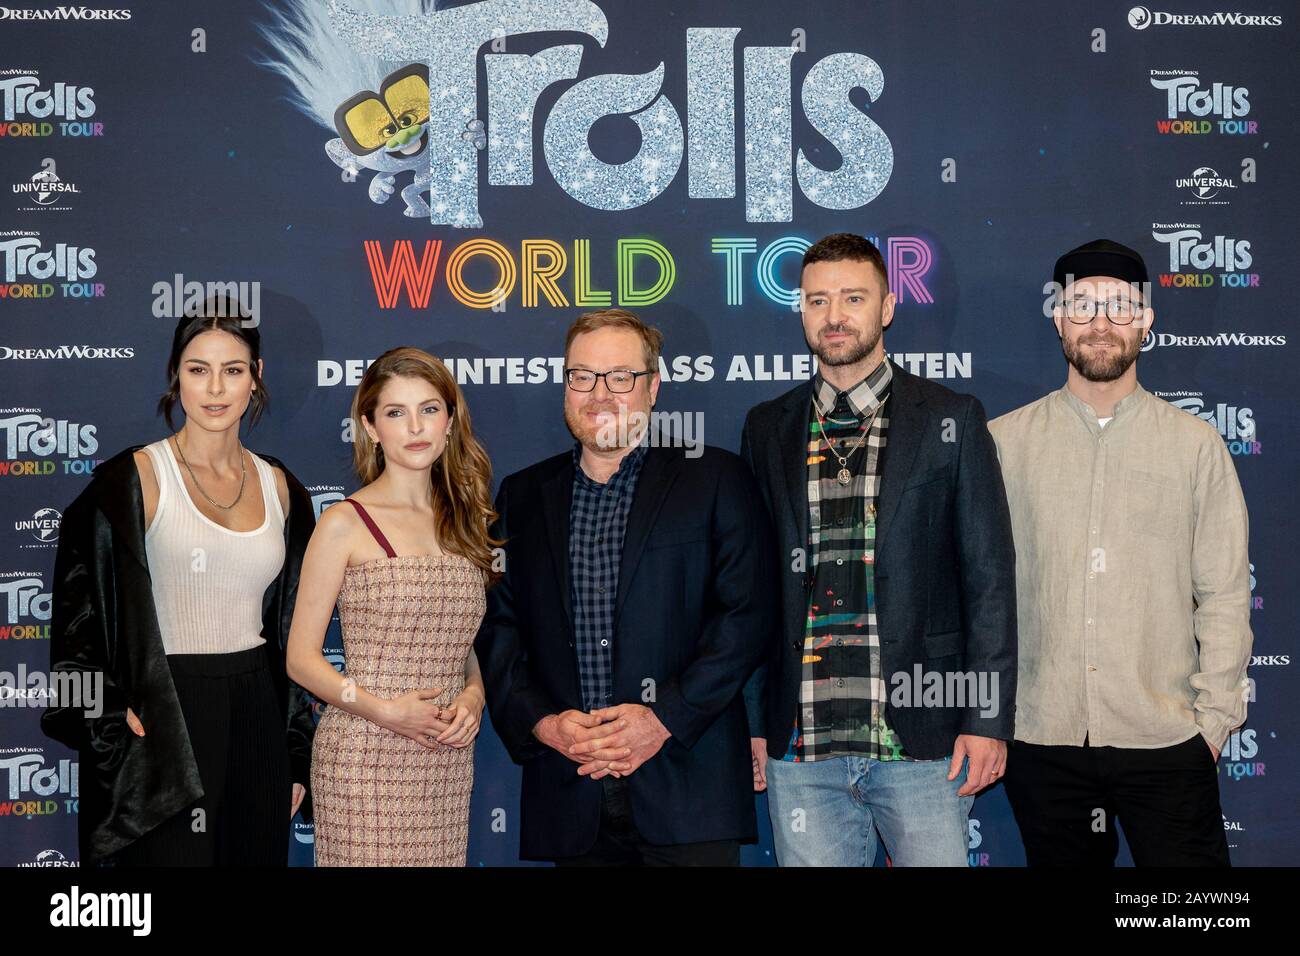 17.02.2020, group photo with Lena Meyer-Landrut (lr), Anna Kendrick, Walt Dohrn, Justin Timberlake and Mark Forster at the photocall for the film Trolls World Tour at the Waldorf Astoria Hotel in Berlin. The new animated film from DreamWorks Animation, distributed by Universal Pictures International Germany, will be launched nationwide on April 23, 2020 in German cinemas. | usage worldwide Stock Photo